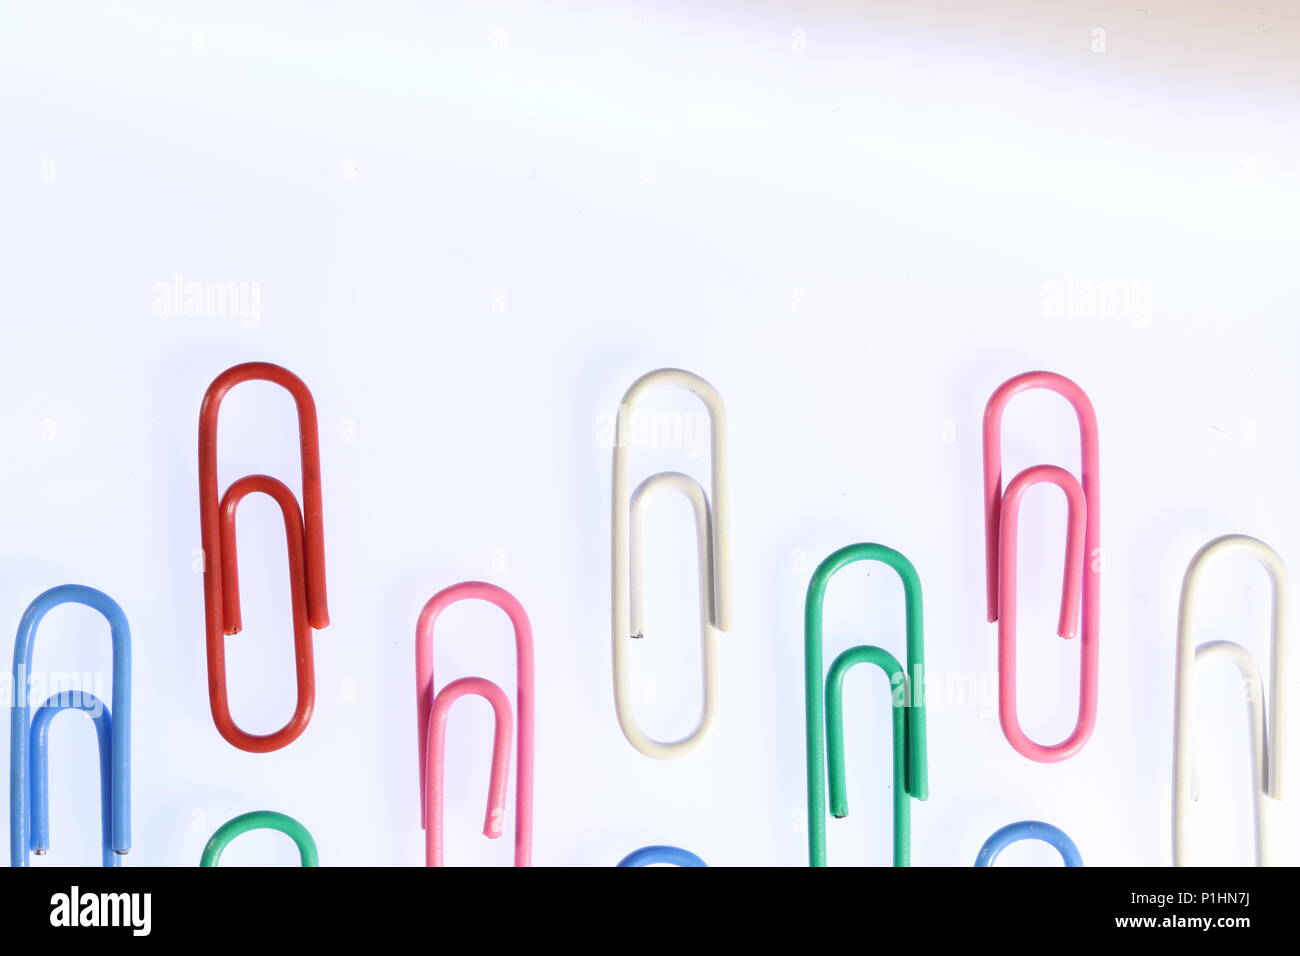 many colored isolated paper clips office stationery equipment background place for text P1HN7J